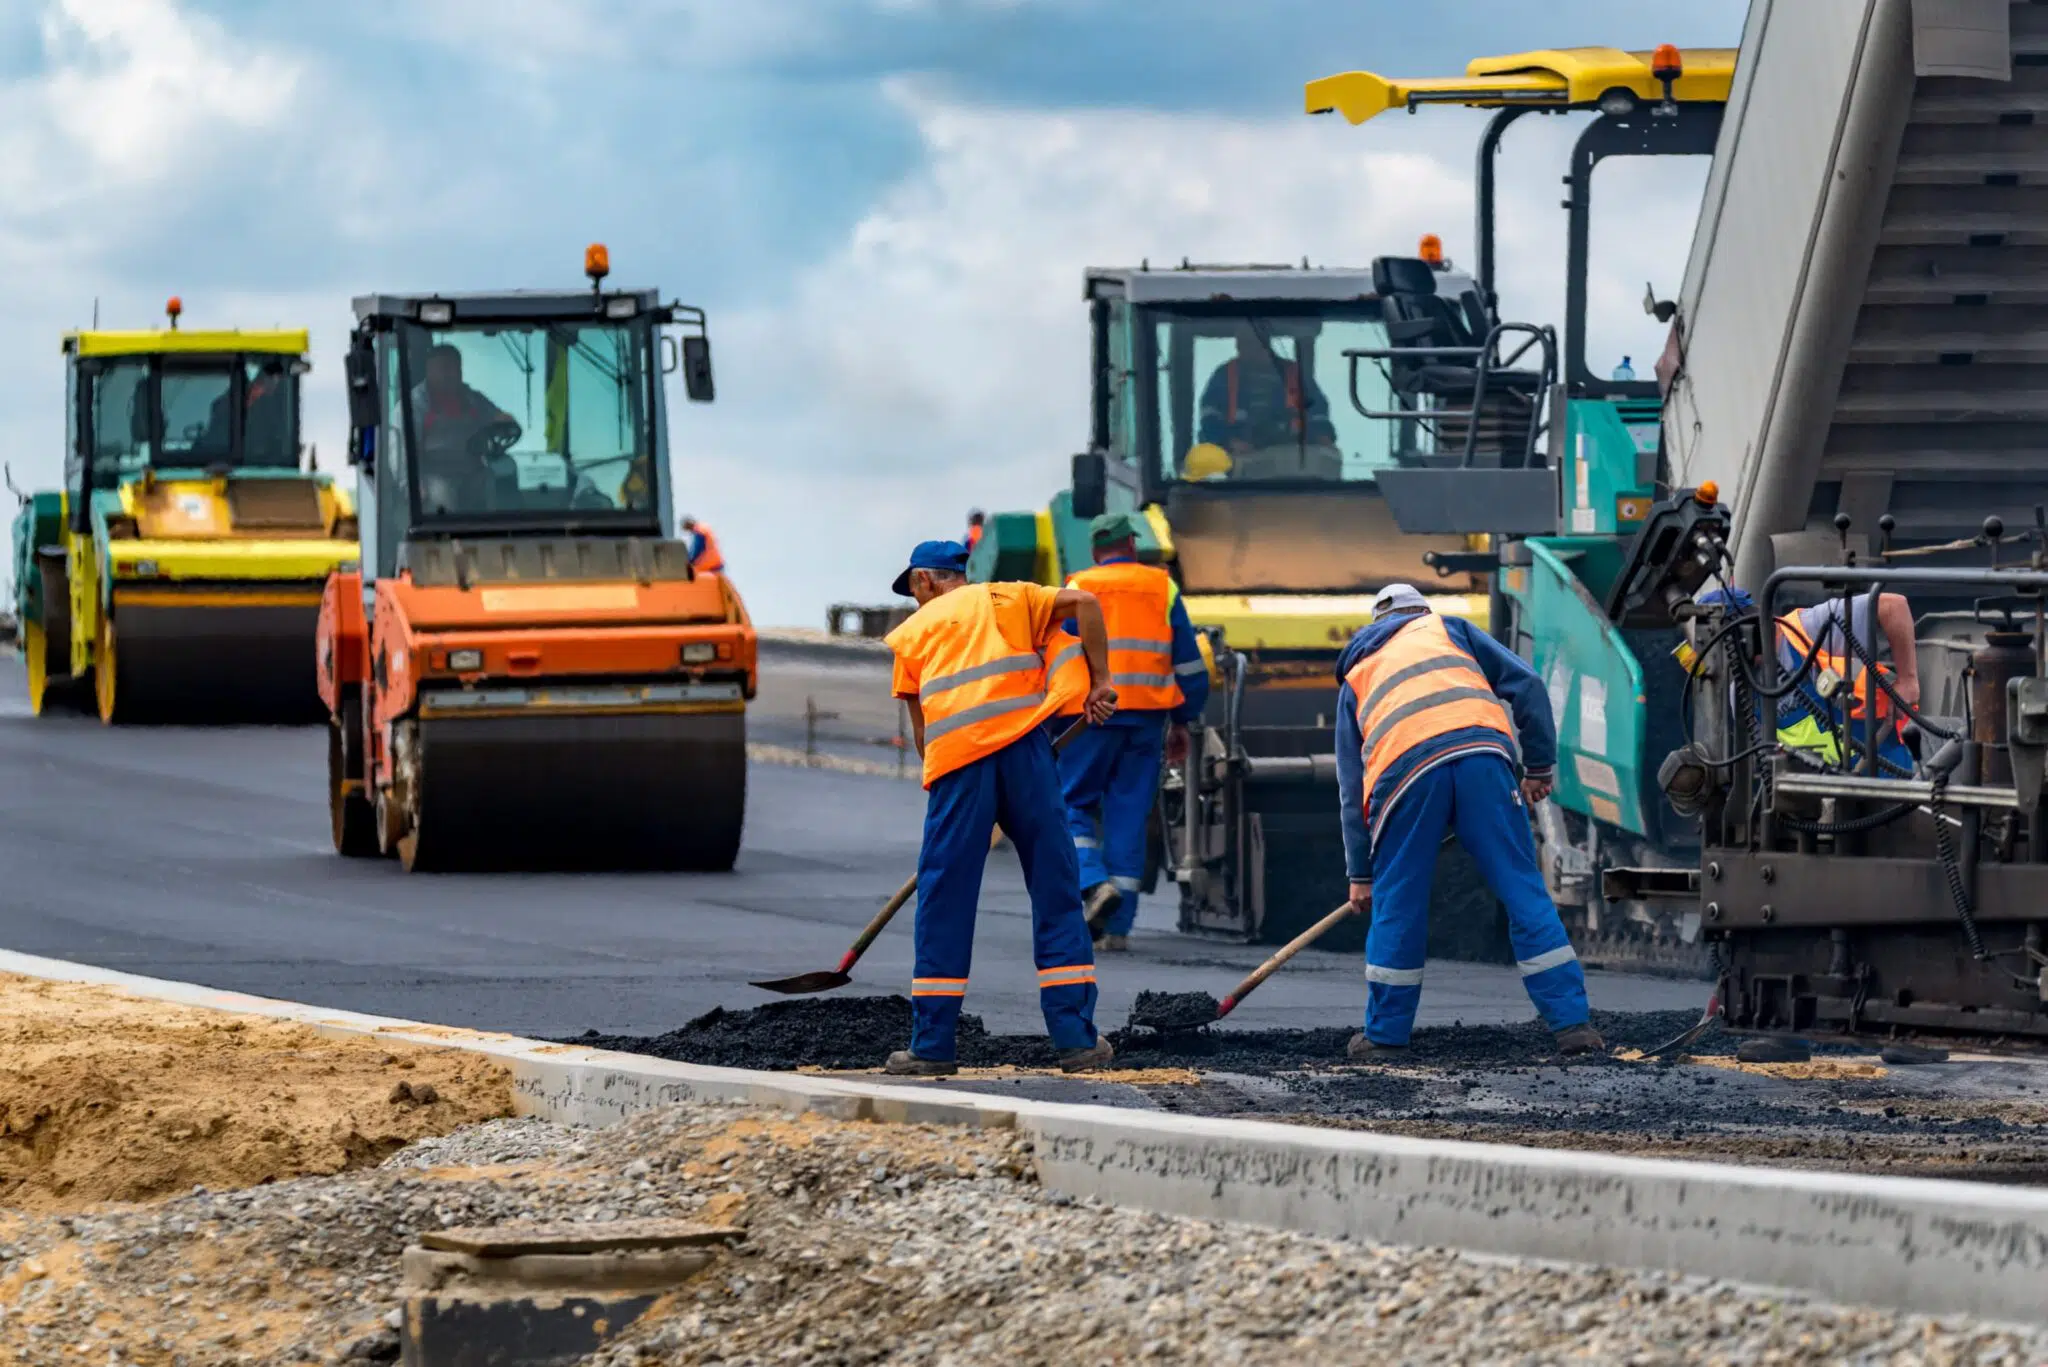 Construction workers at a roadside construction site applying pavement.